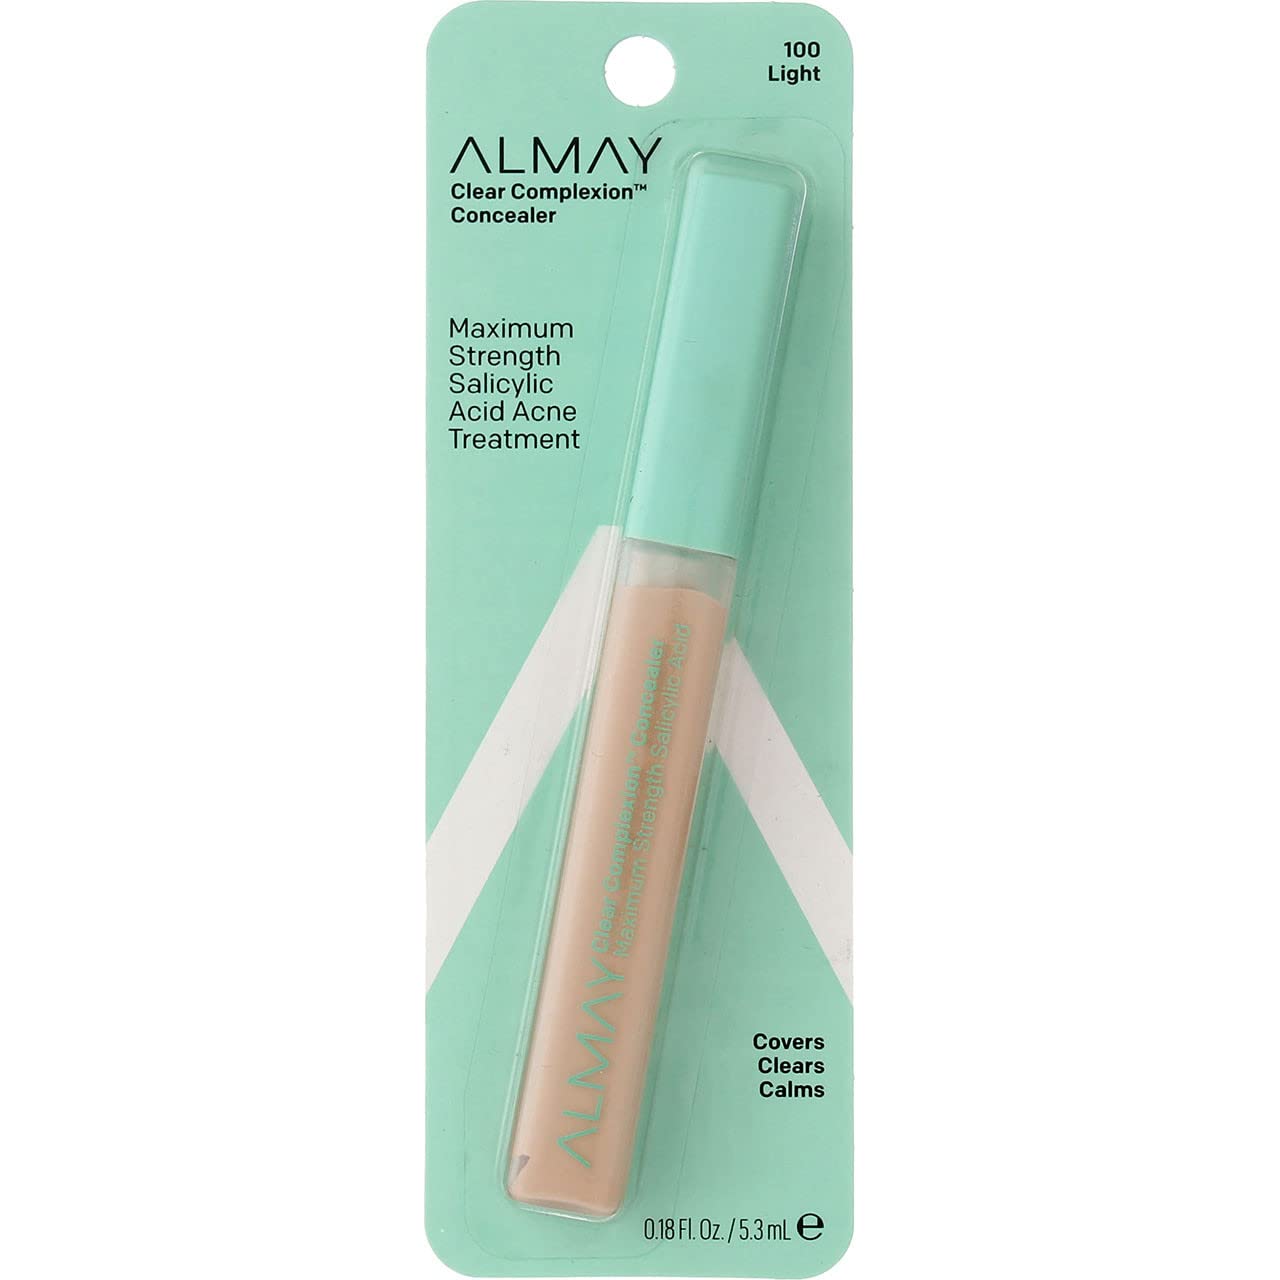 Almay Clear Complexion Concealer Corrector, Light [100], 0.18 oz (Pack of 2)